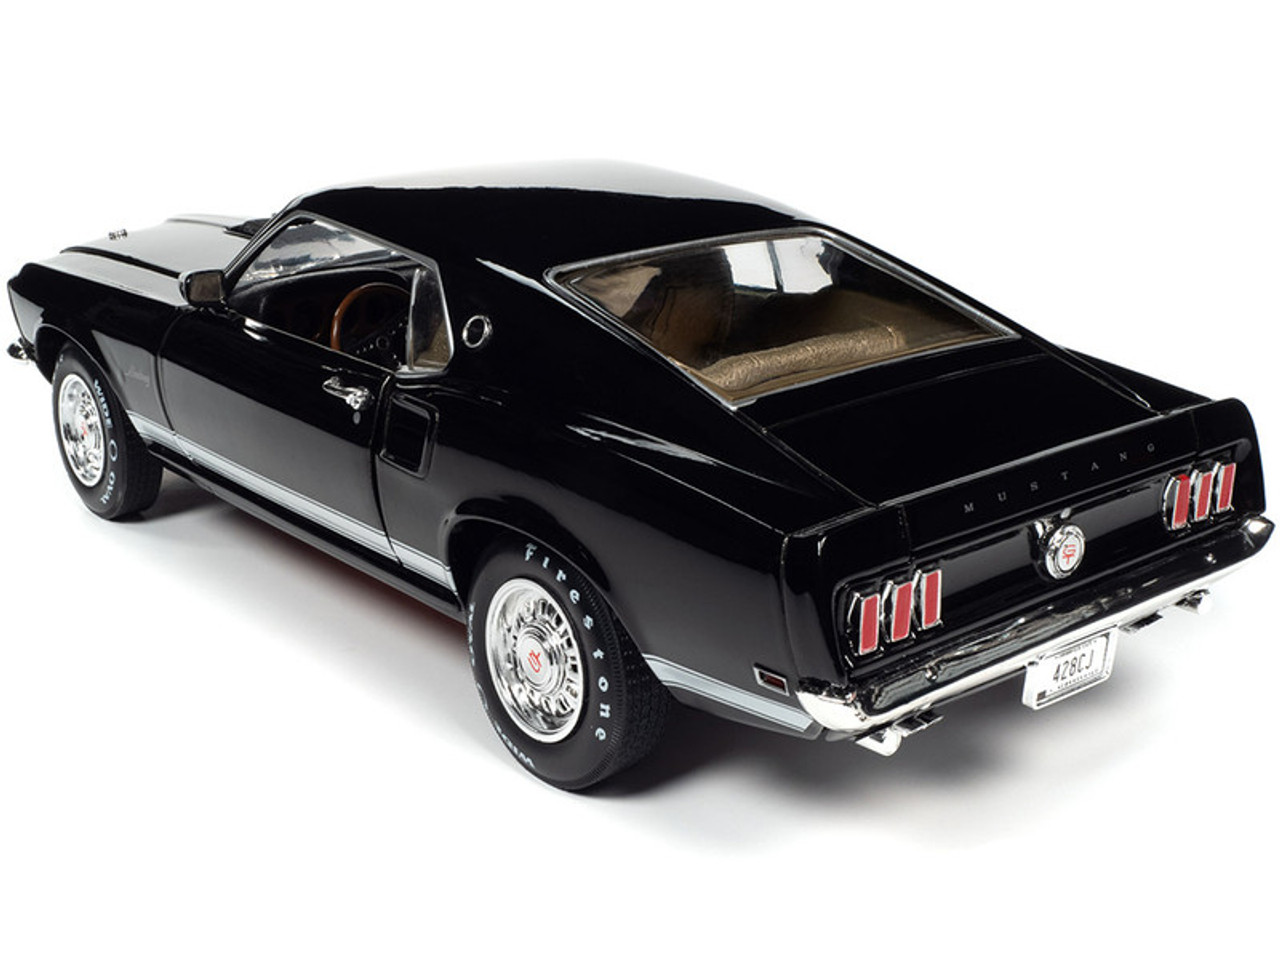 1/18 Auto World 1969 Ford Mustang GT 2+2 Raven Black Limited Edition Diecast Car Model